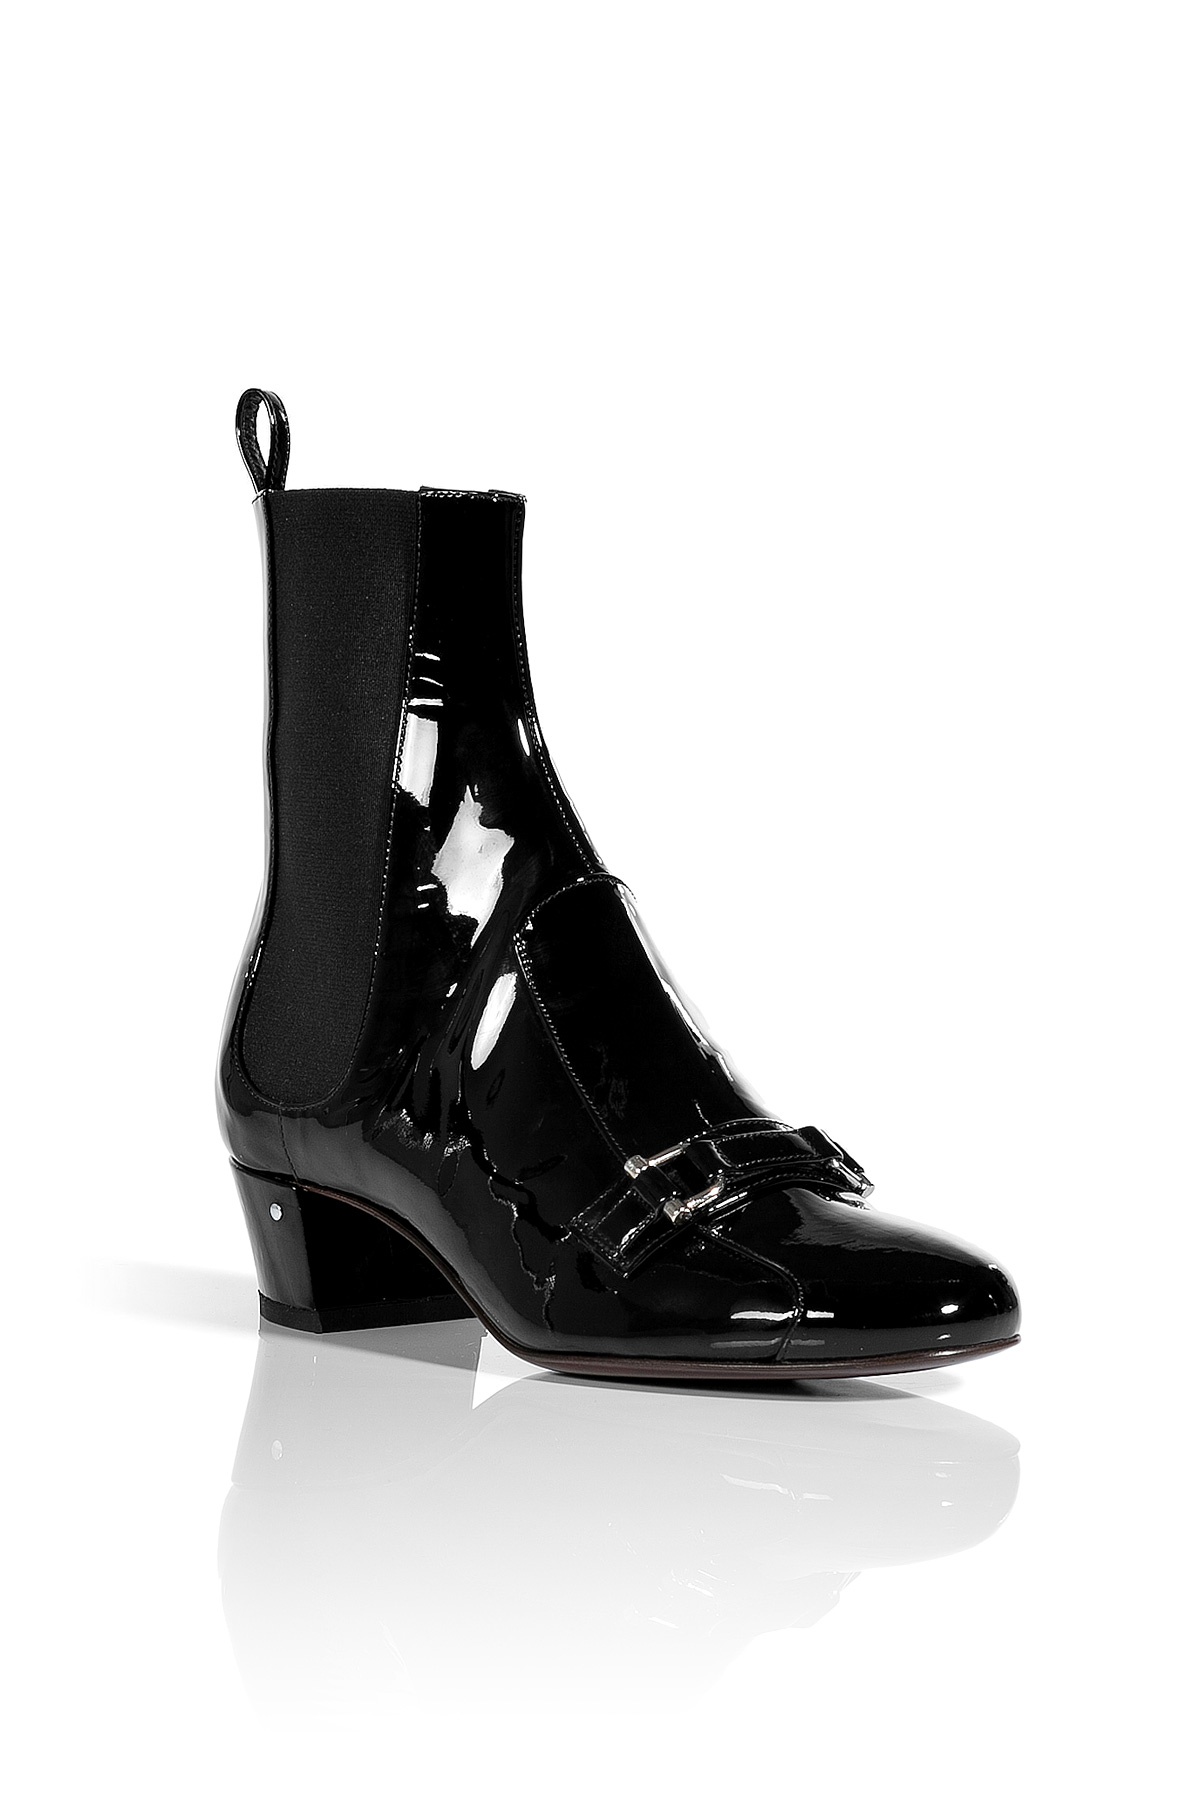 Lyst - Laurence Dacade Black Patent Leather Ankle Boots in Black